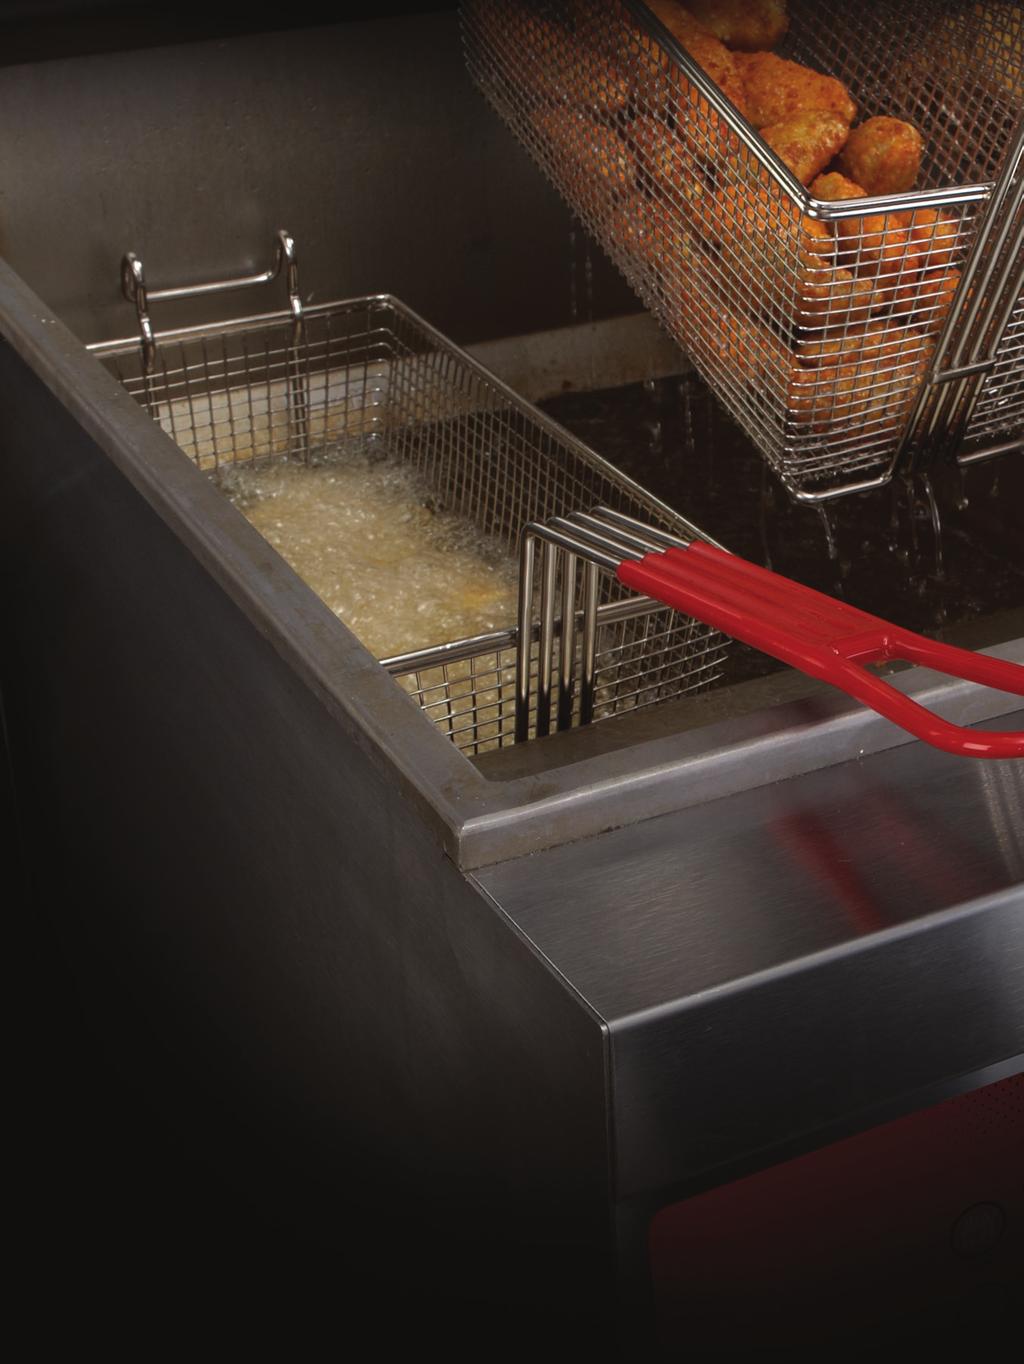 Because every day is Fry Day. Designed with you in mind. Vulcan fryers are designed to be the most profitable piece of equipment in your kitchen day in and day out.